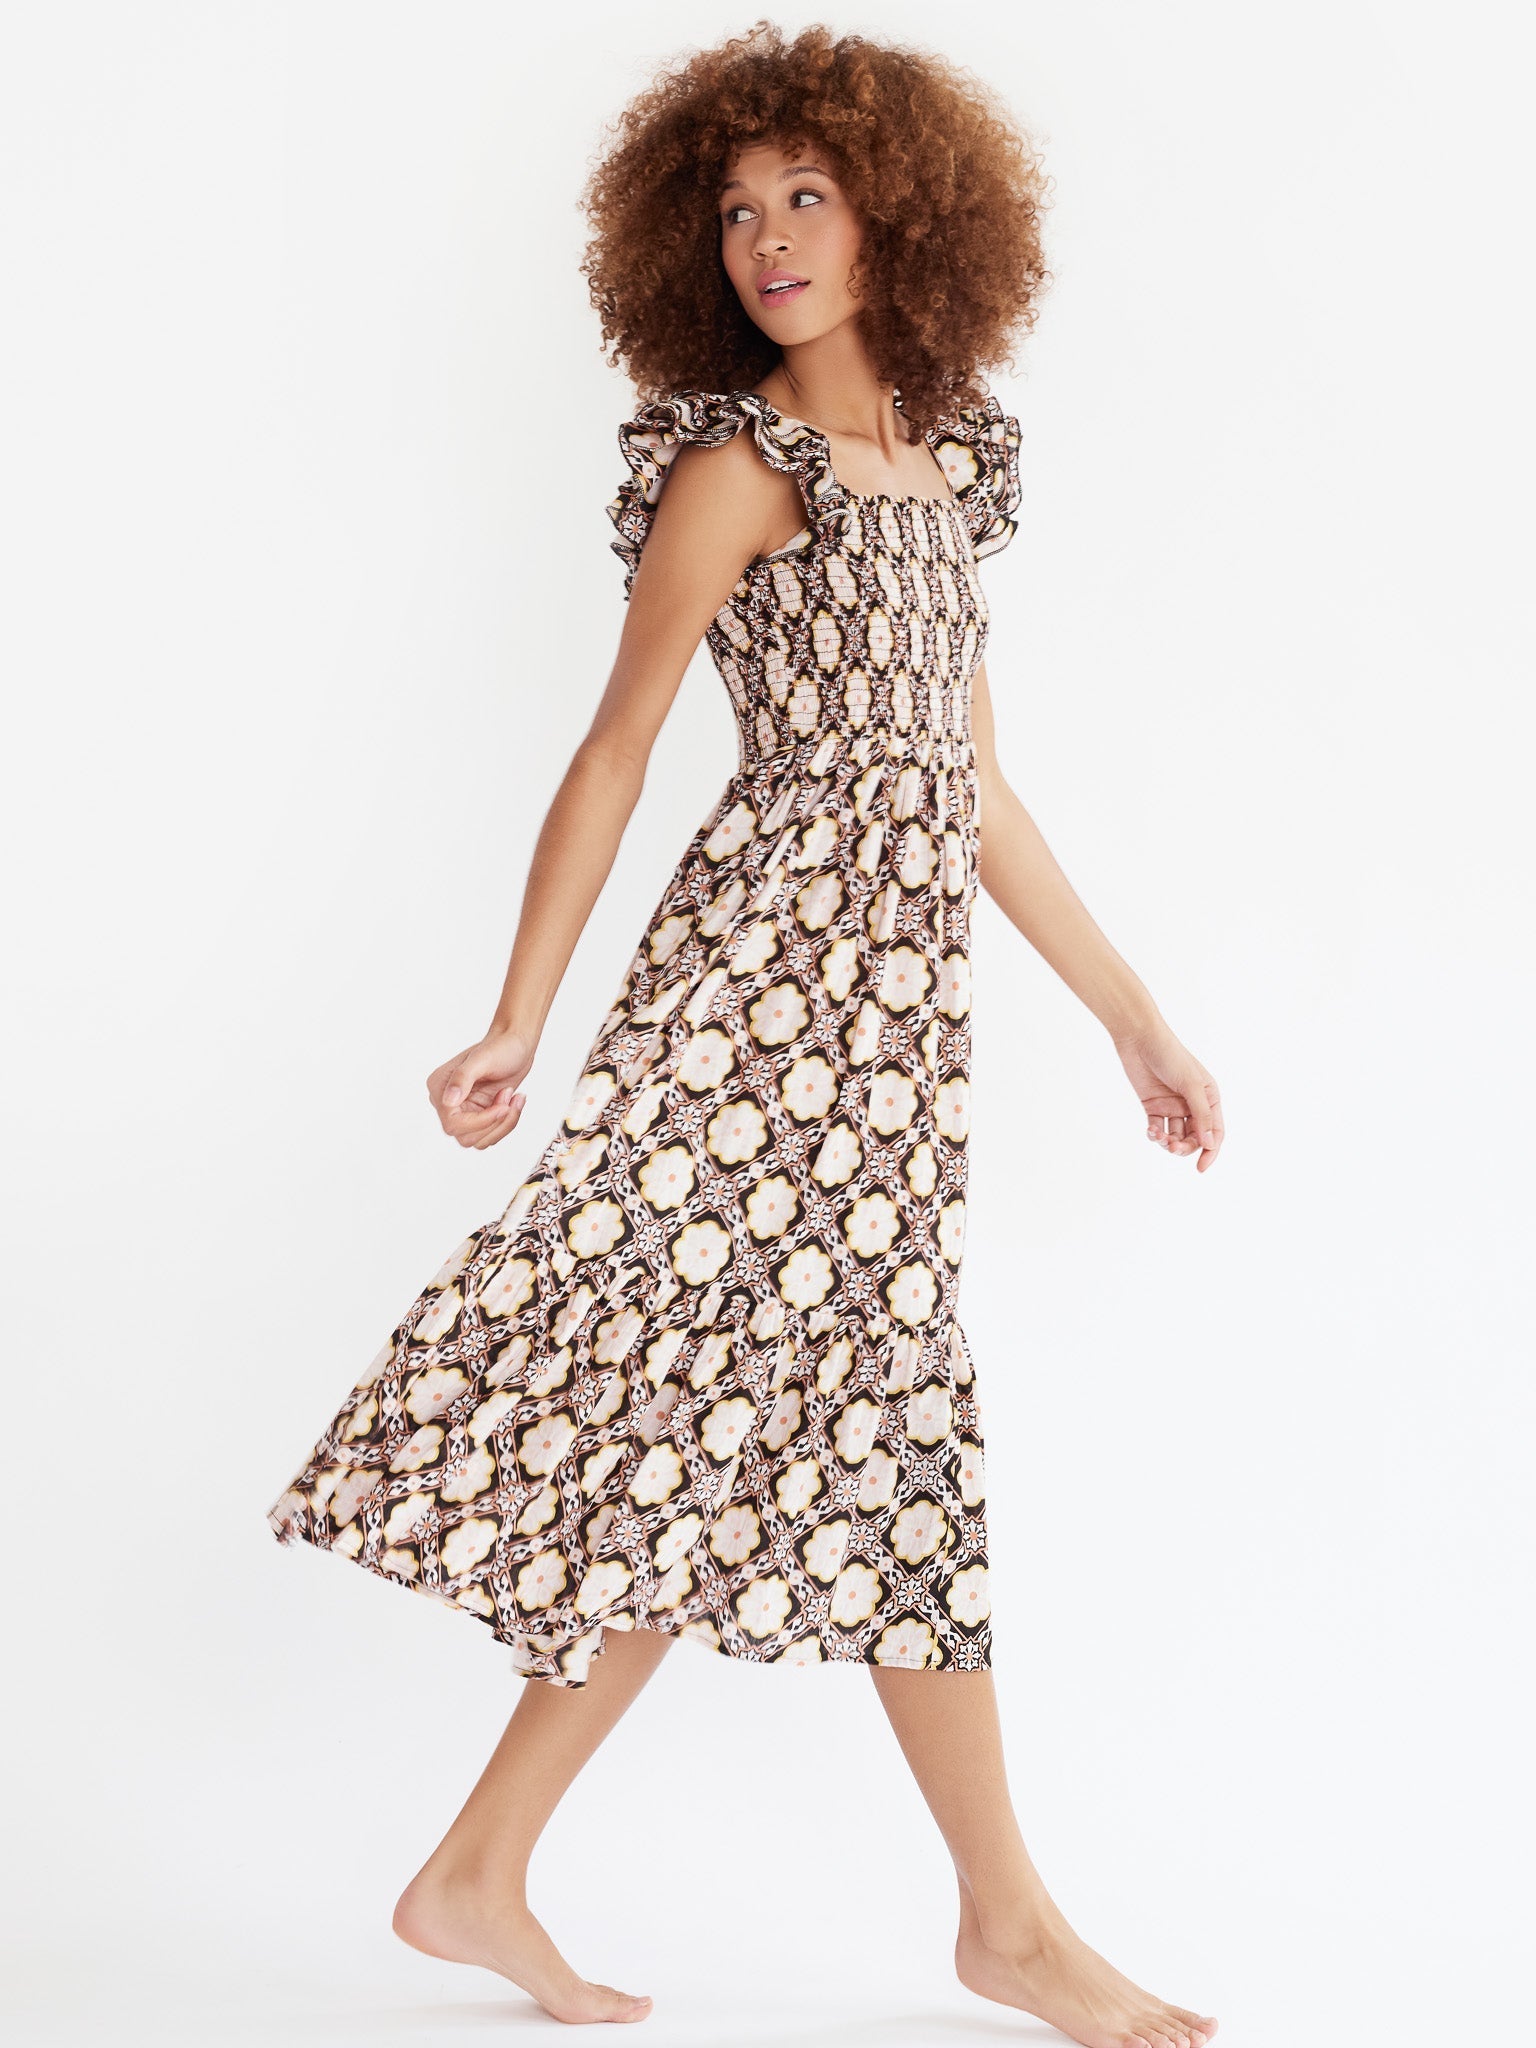 MILLE Clothing Olympia Dress in Merida